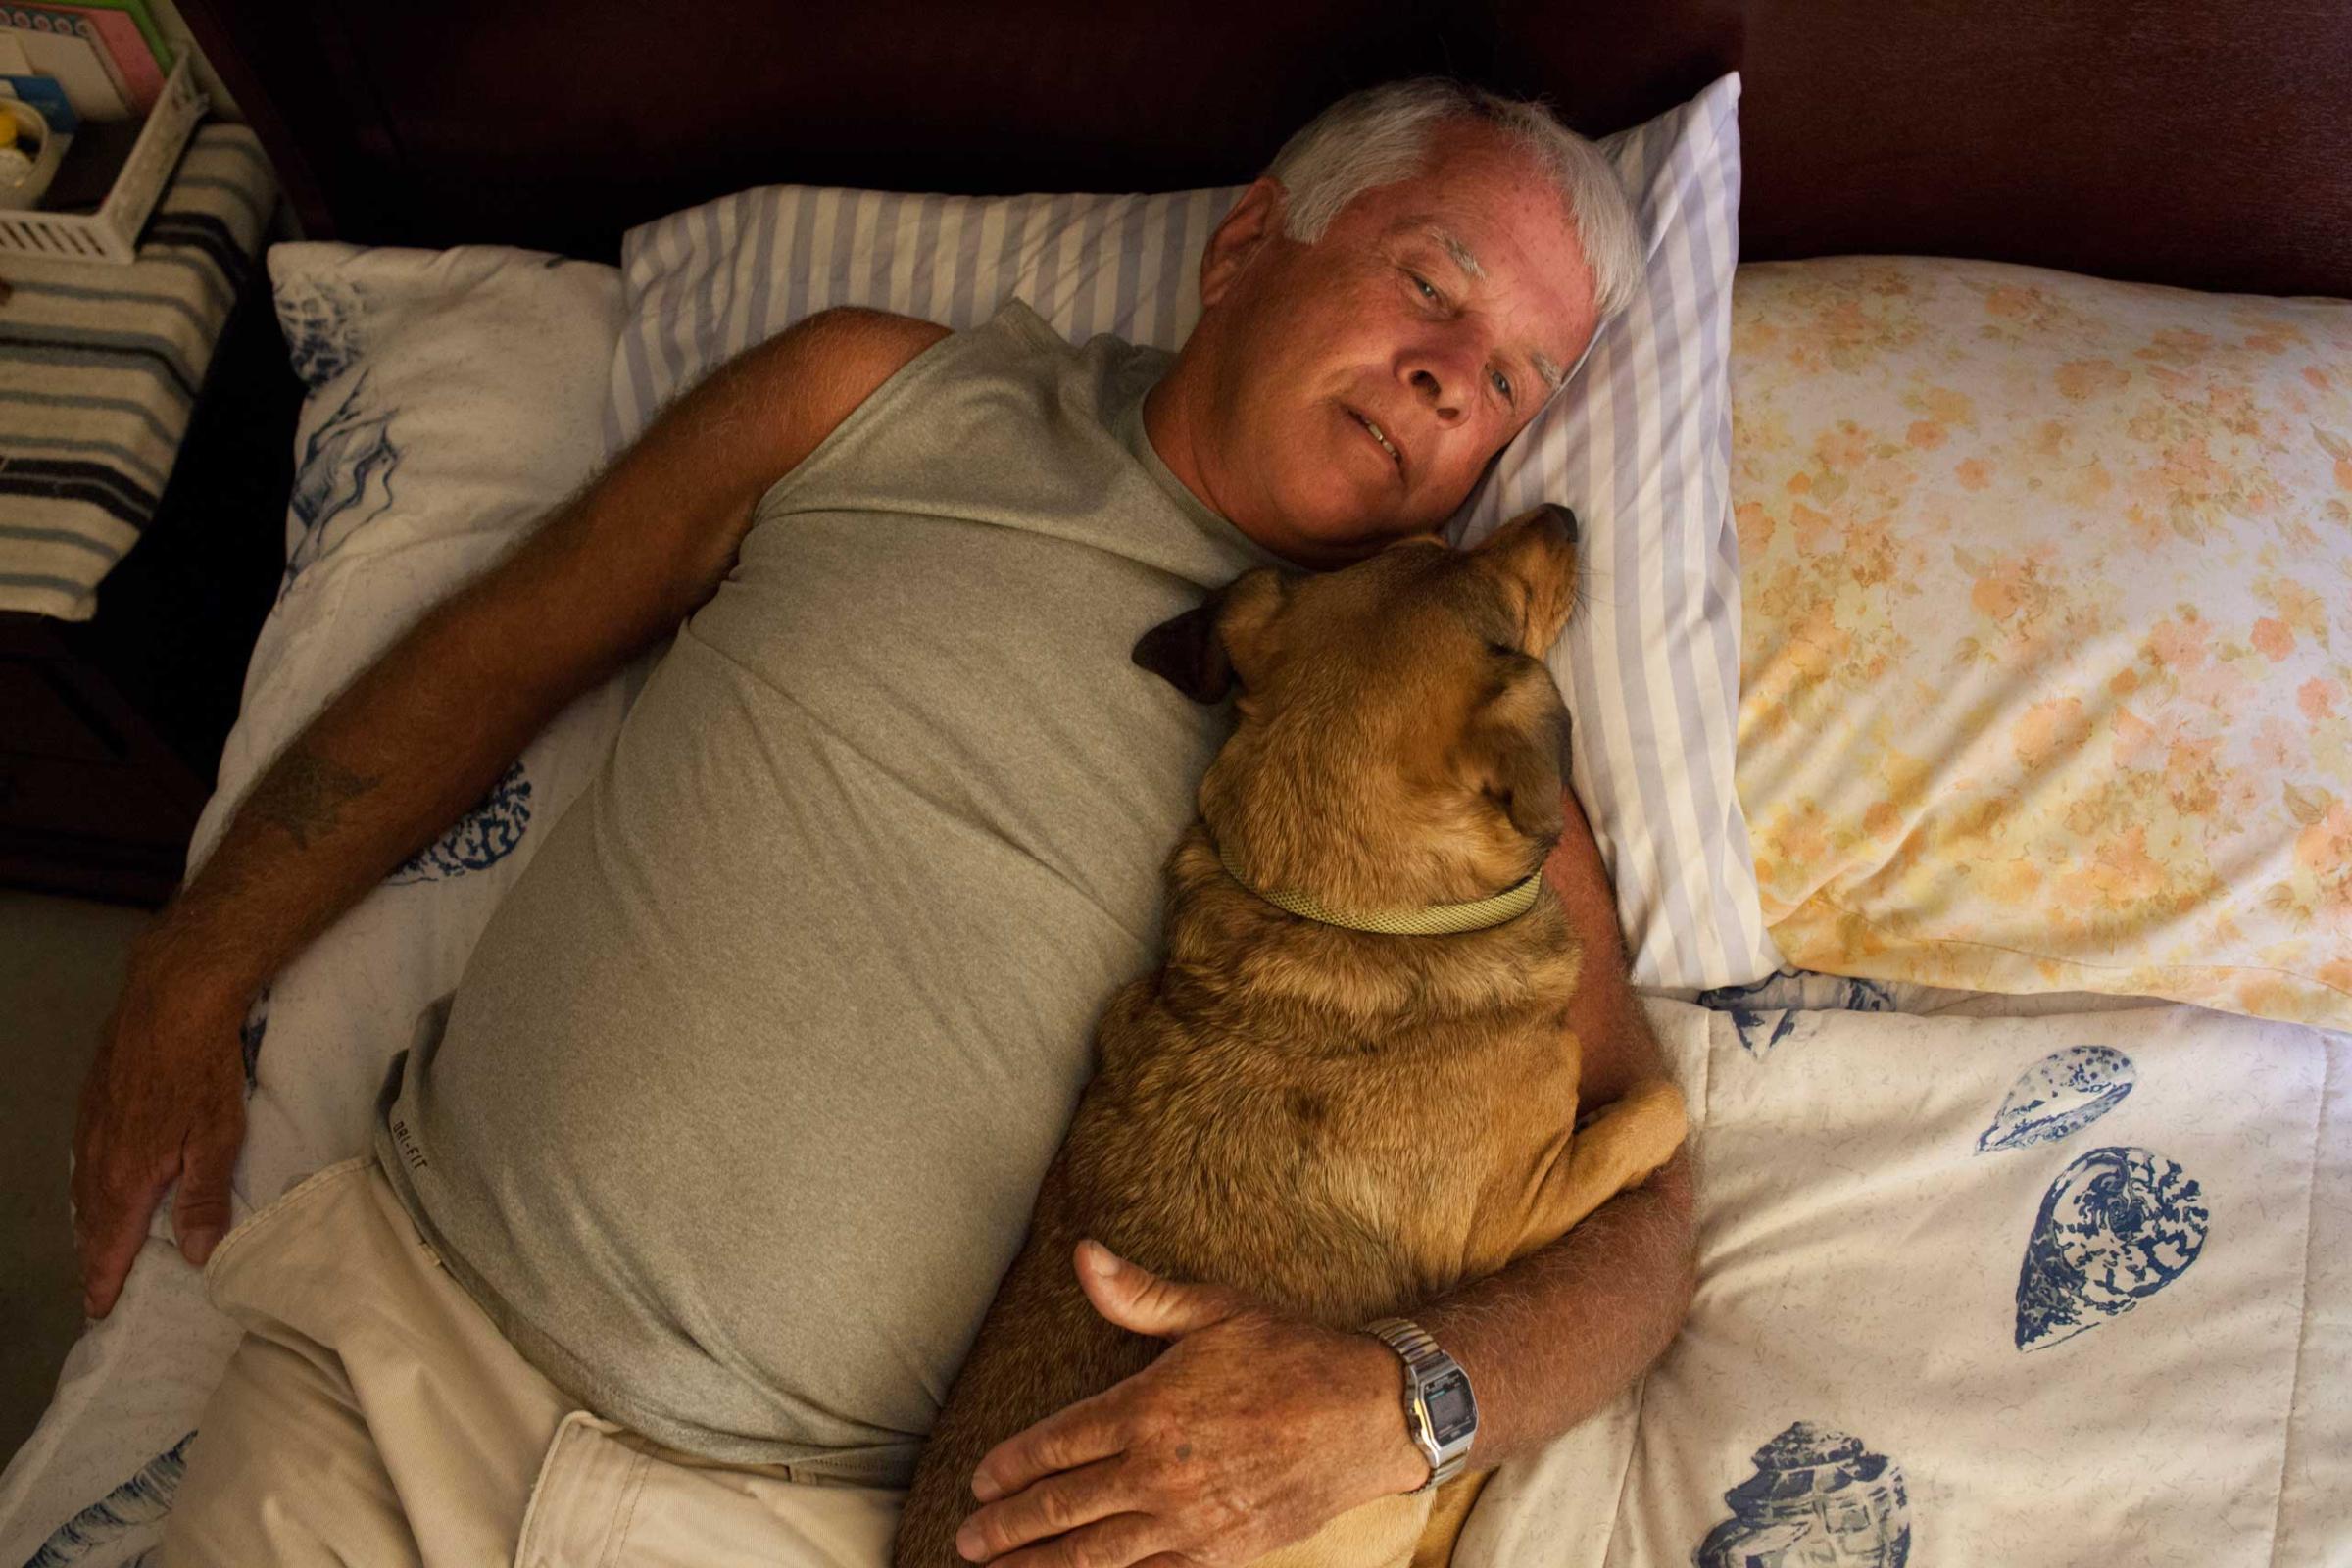 Gene laying down with his dog Killer for a nap."Only a fool would truly trust anyone if you are a sex offender."